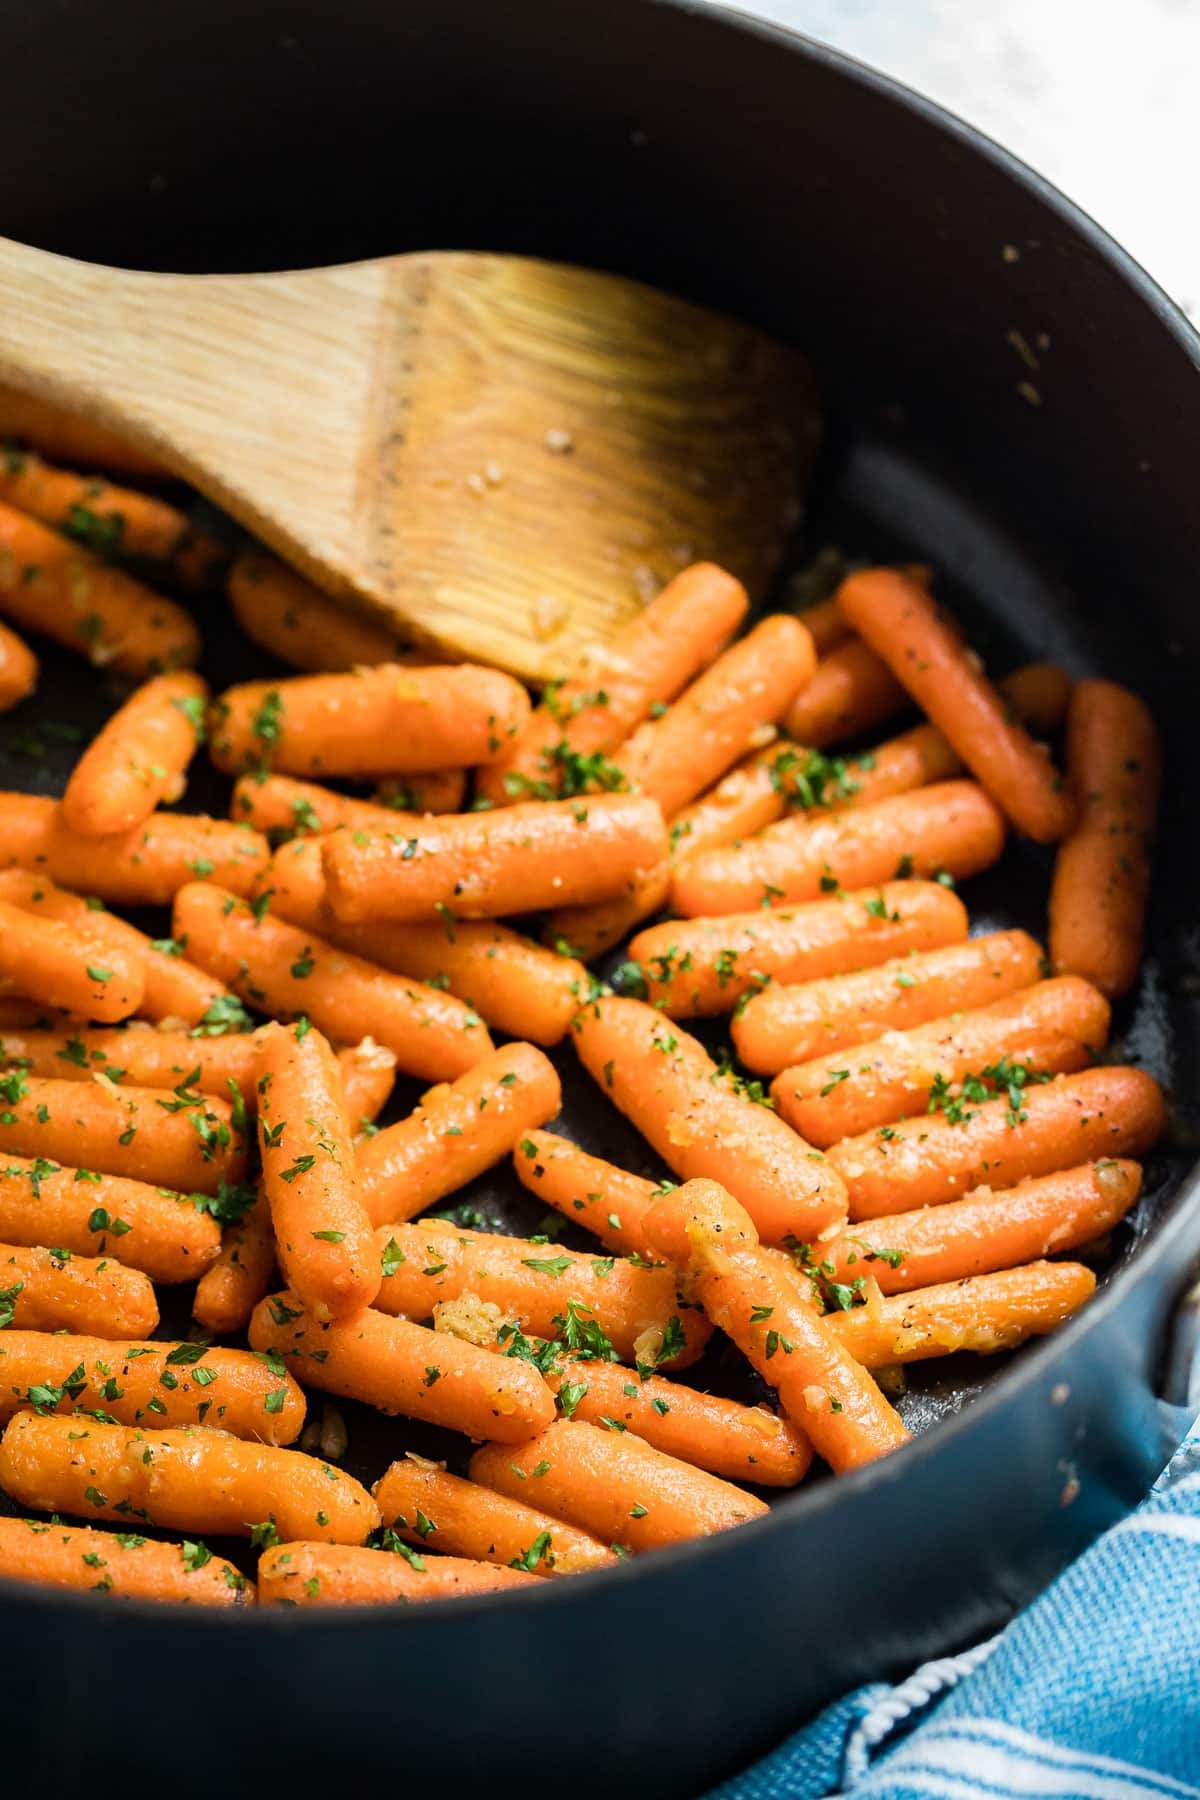 The side of a pan of sauteed carrots with a wooden spoon in it.